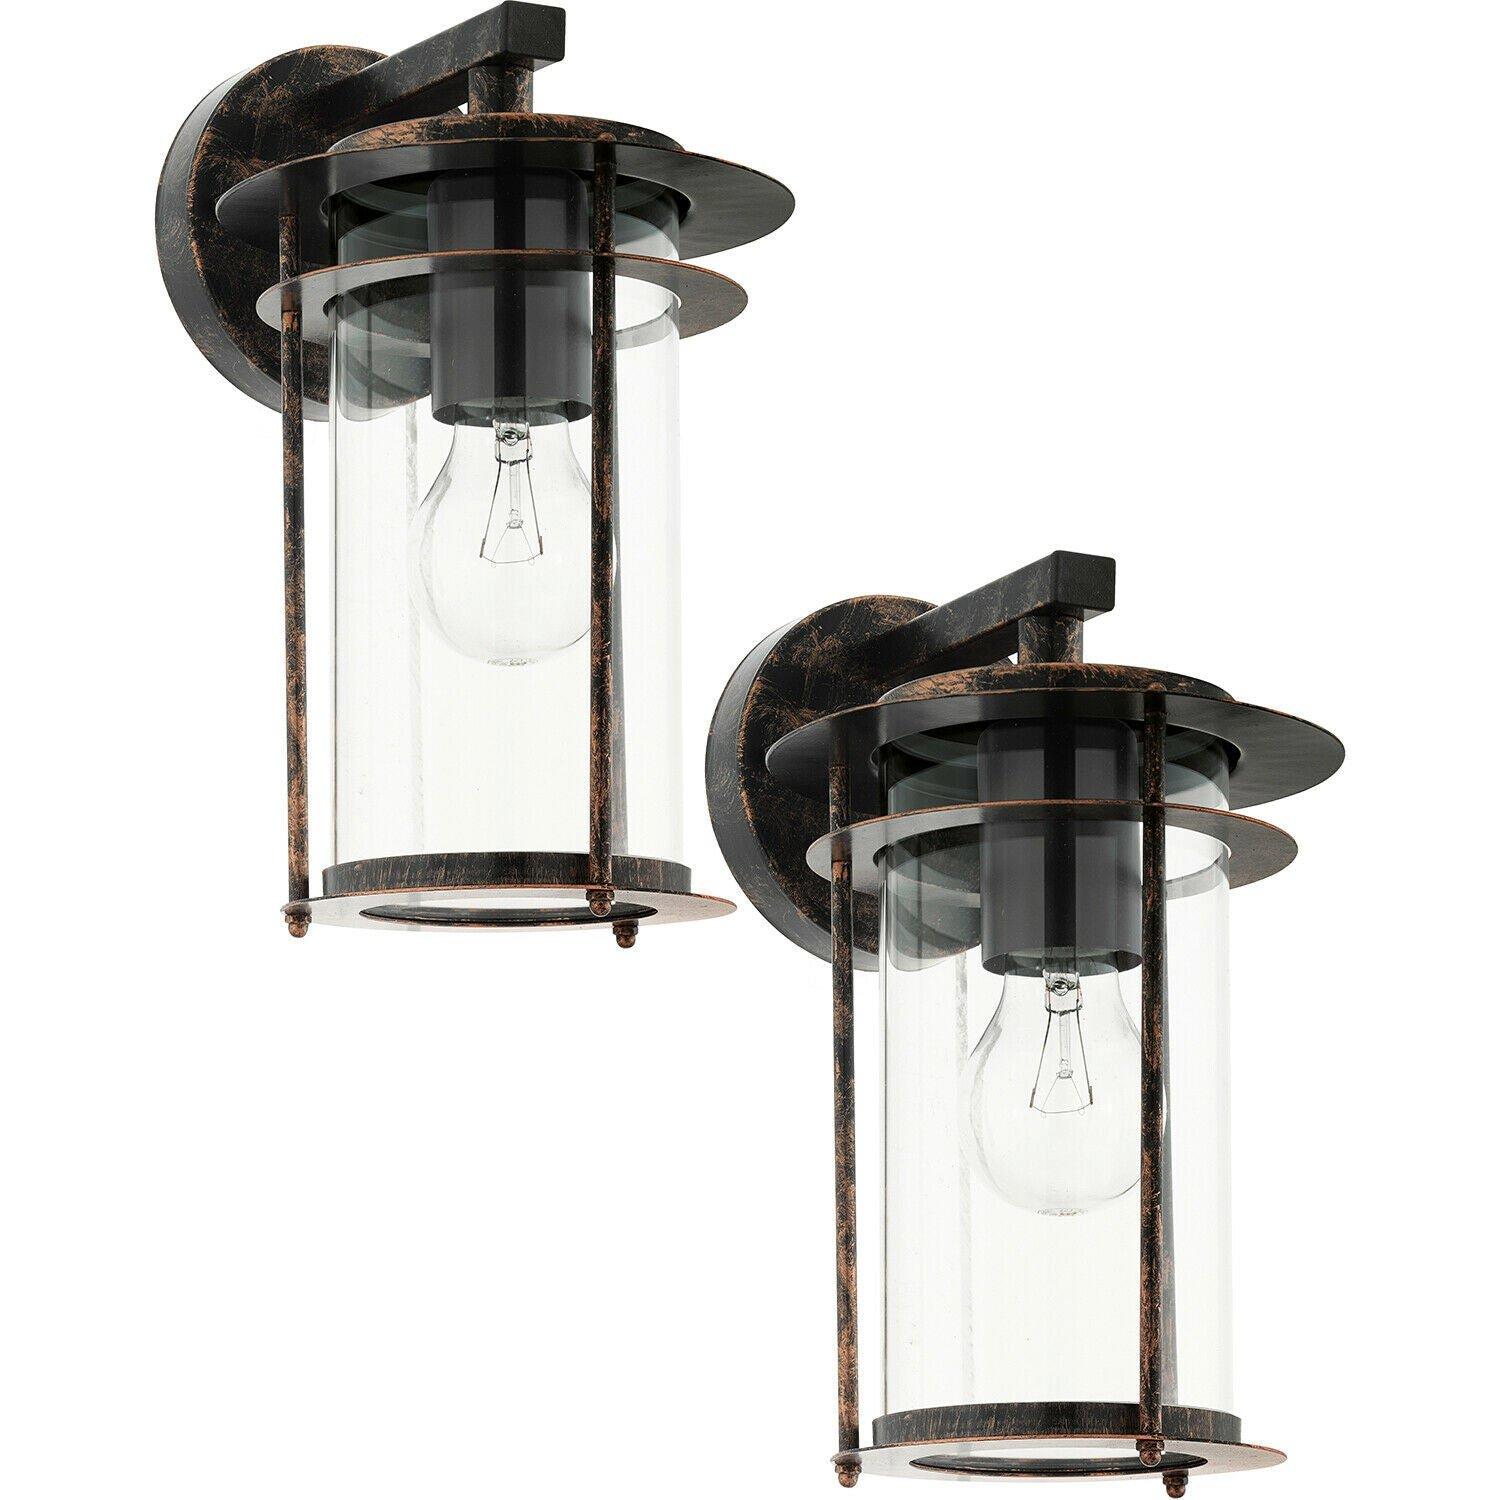 2 PACK IP44 Outdoor Wall Light Antique Copper & Glass Shade Lamp 1x 60W E27